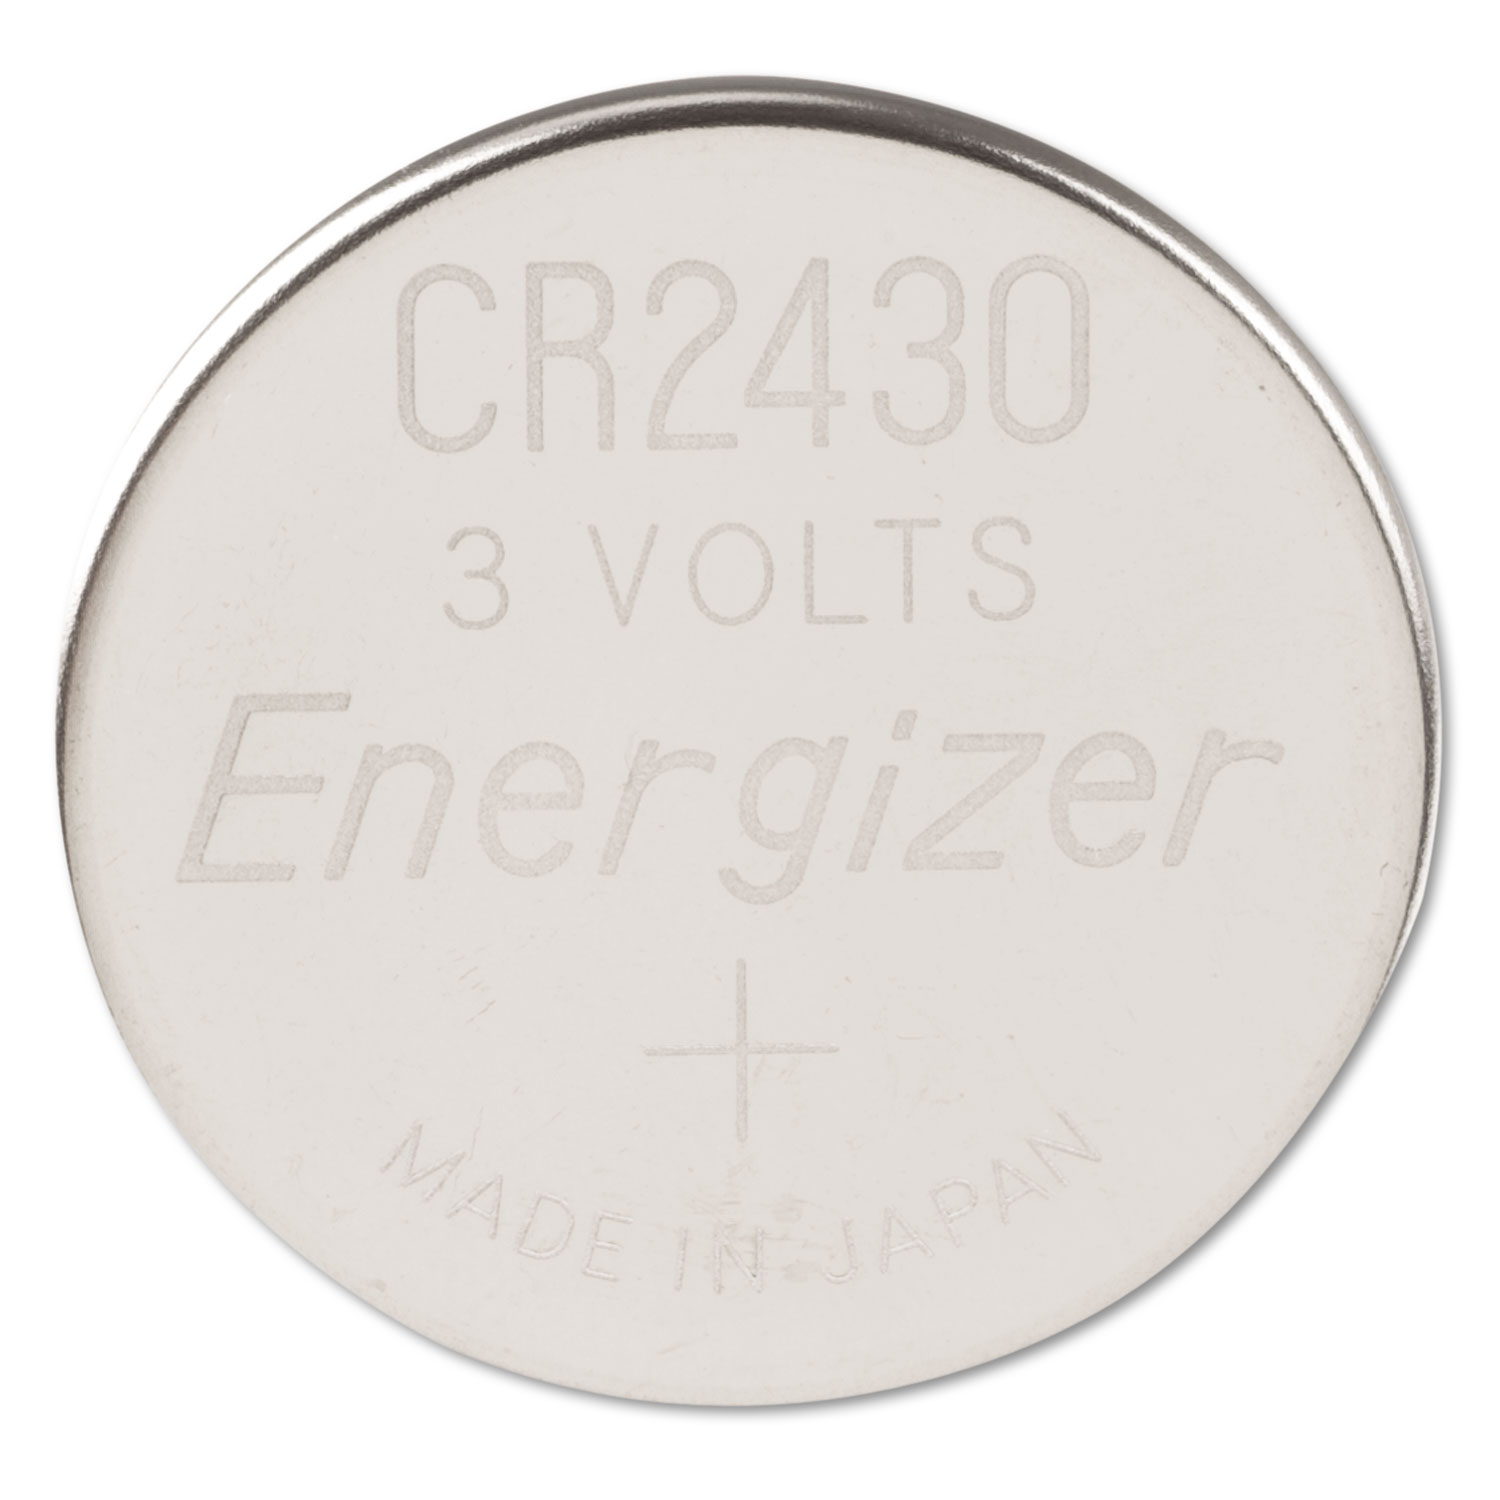 Energizer CR2430 Lithium coin battery